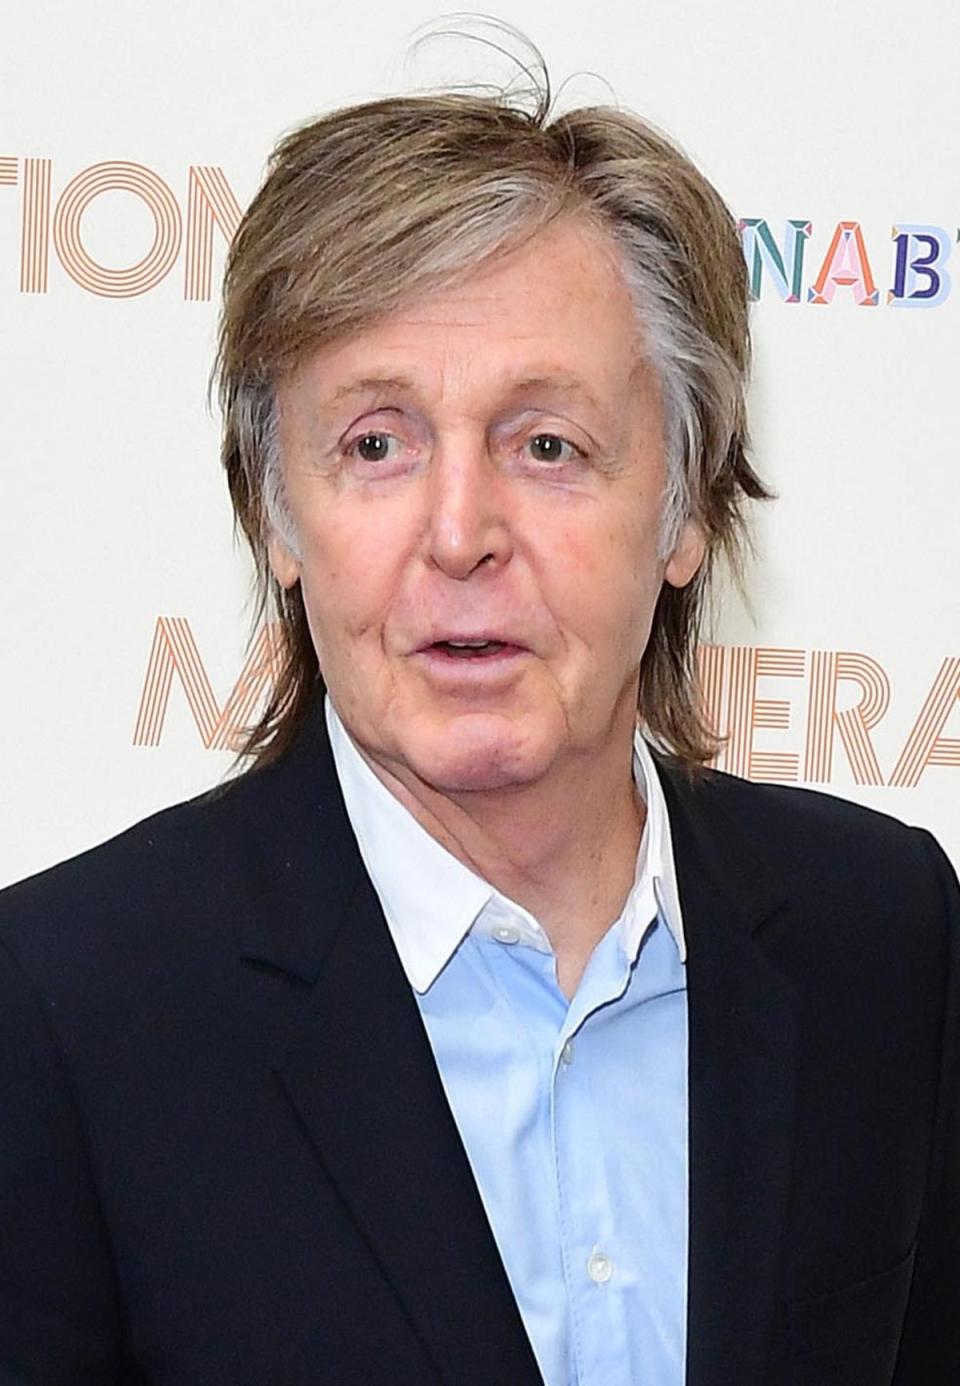 Sir Paul McCartney spoke of his appreciation of the Queen (PA) (PA Wire)